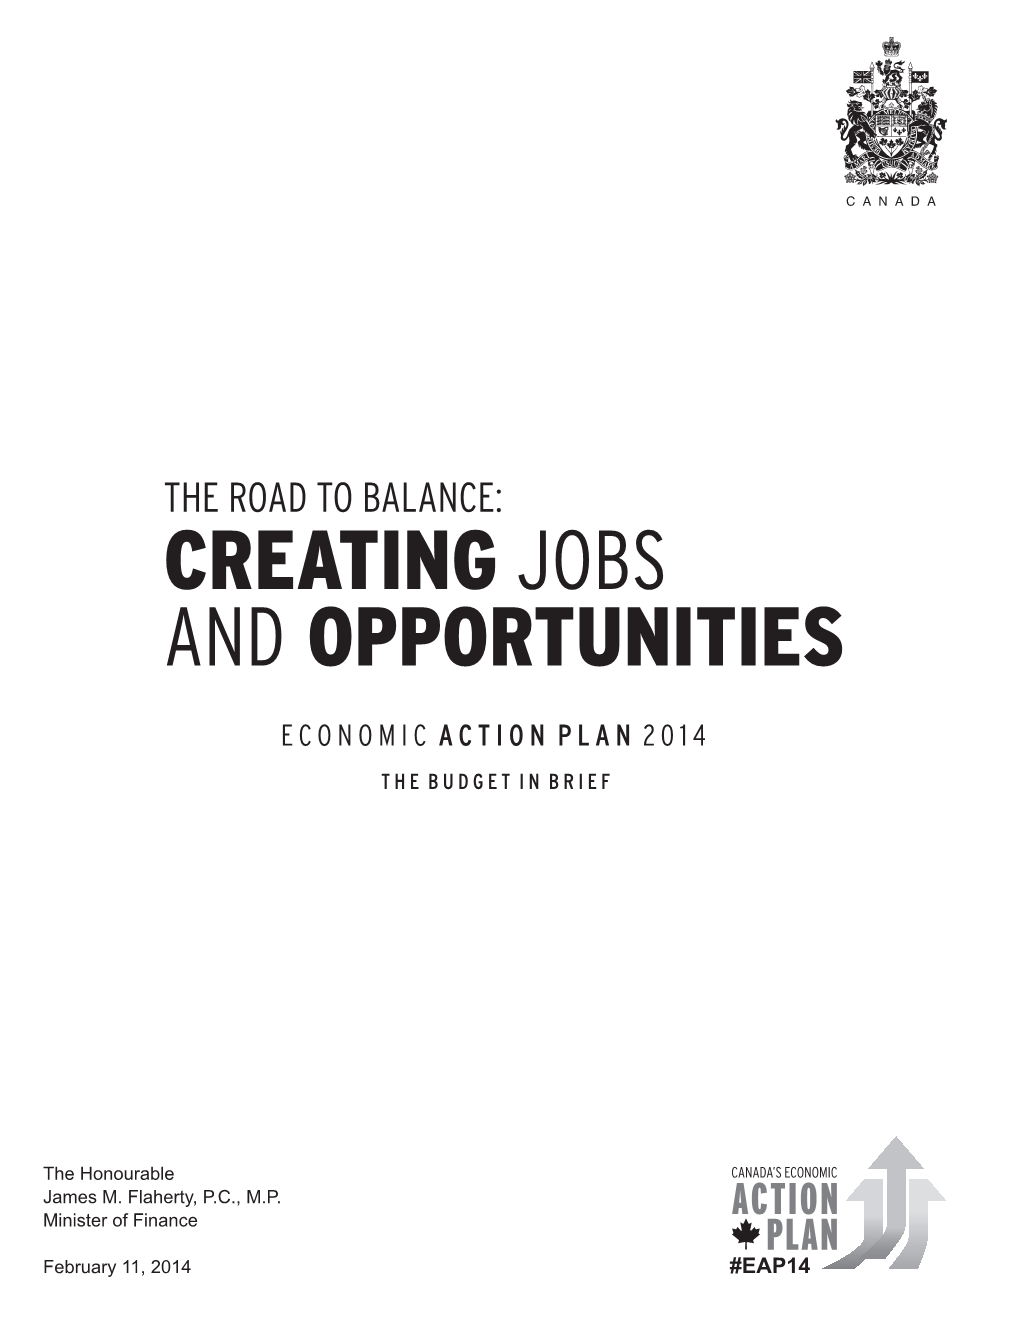 Creating Jobs and Opportunities